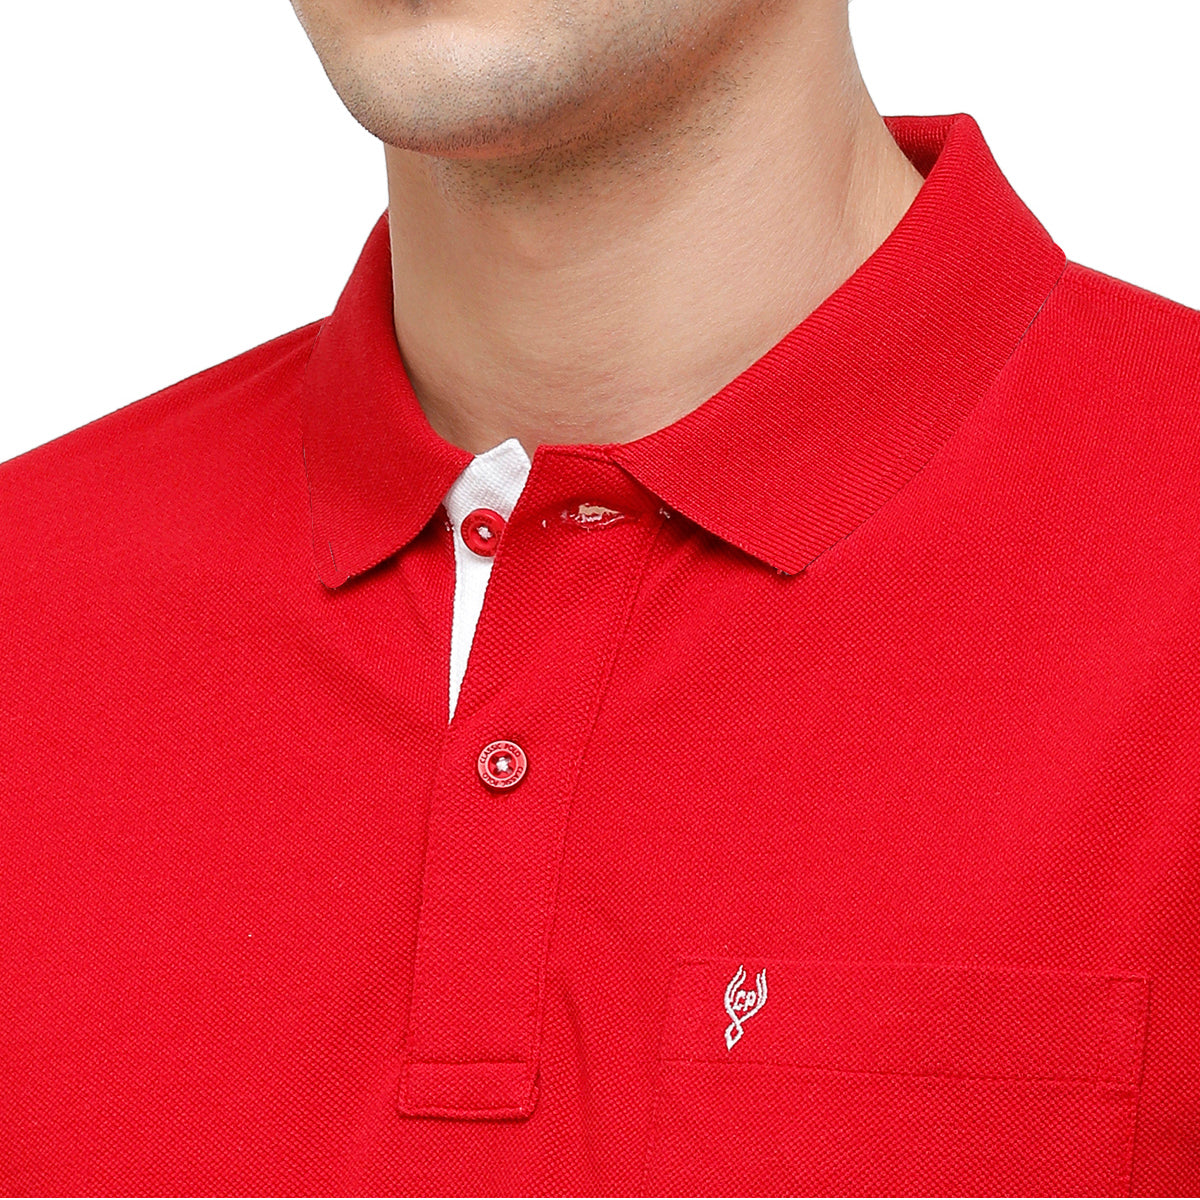 Classic Polo Red Polo Neck Authentic Fit T Shirt Men - 4SSN 215 T-shirt Classic Polo 